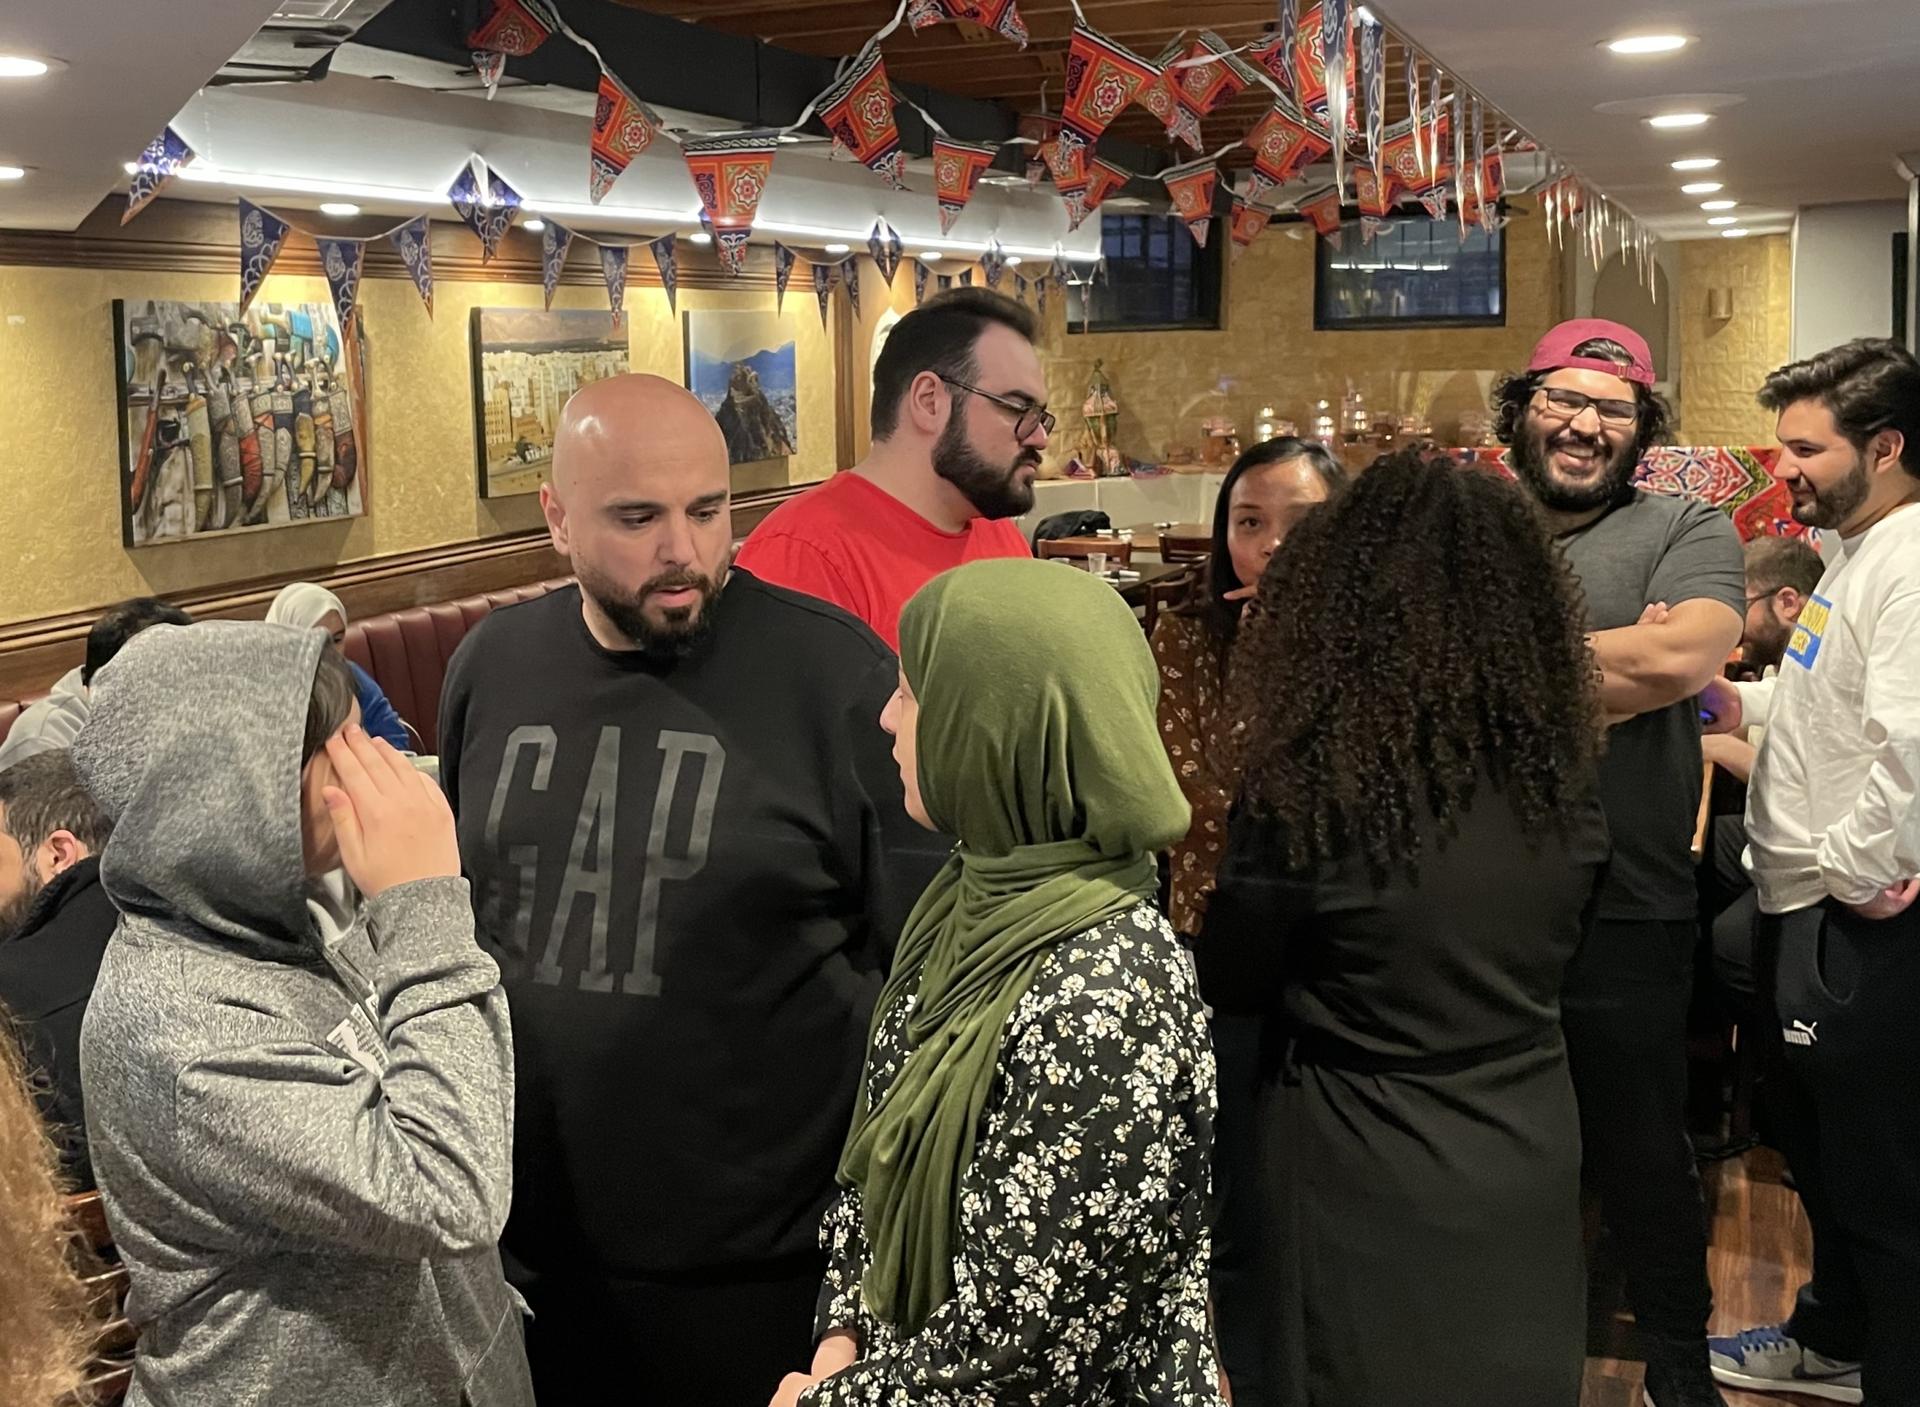 The Bab al-Yemen restaurant offers a buffet option for customers during the Muslim holy month of Ramadan, Boston, Apr. 12, 2023.